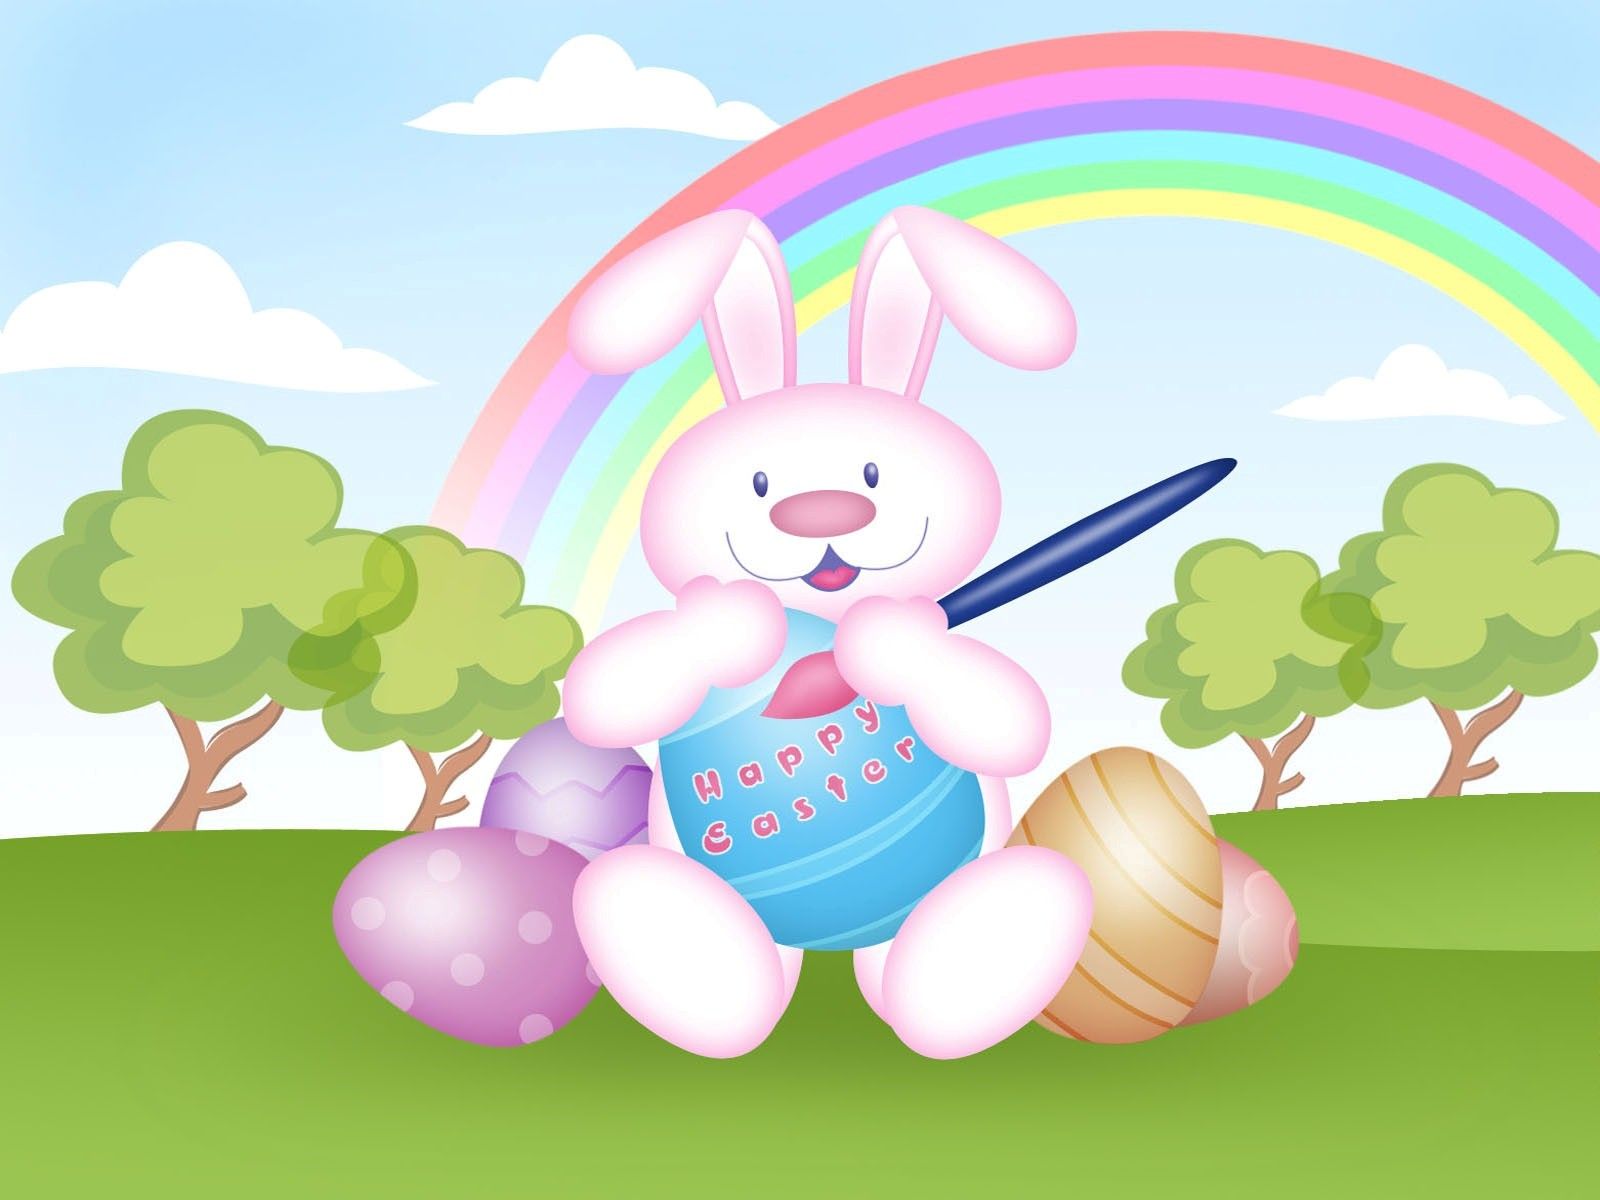 Happy Easter Winnie The Pooh Wallpapers